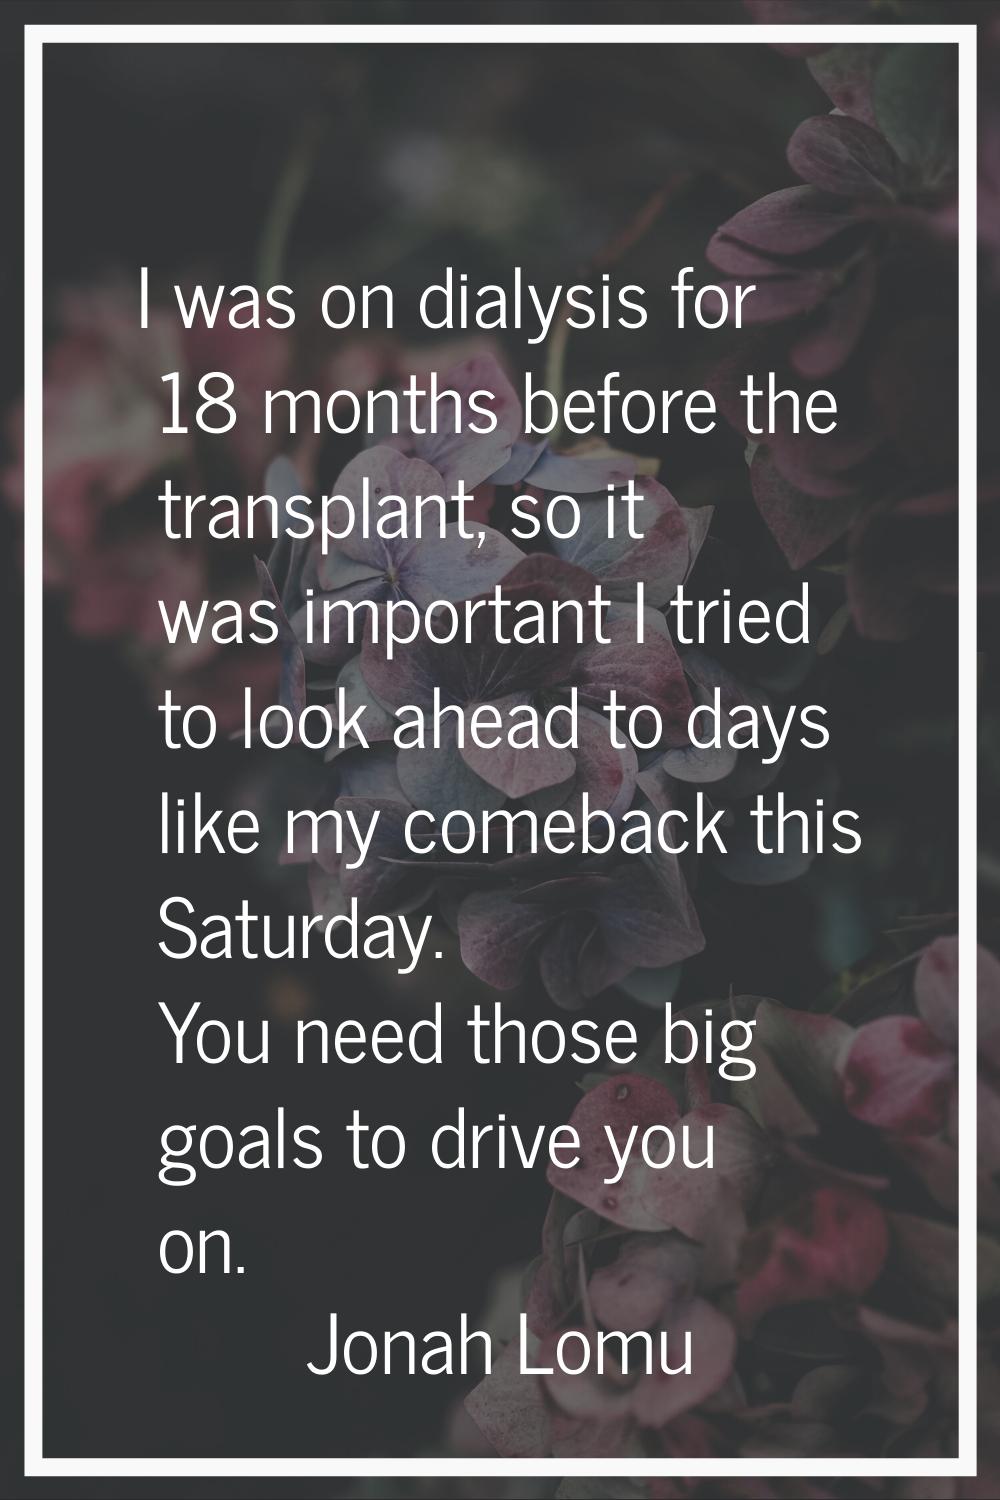 I was on dialysis for 18 months before the transplant, so it was important I tried to look ahead to